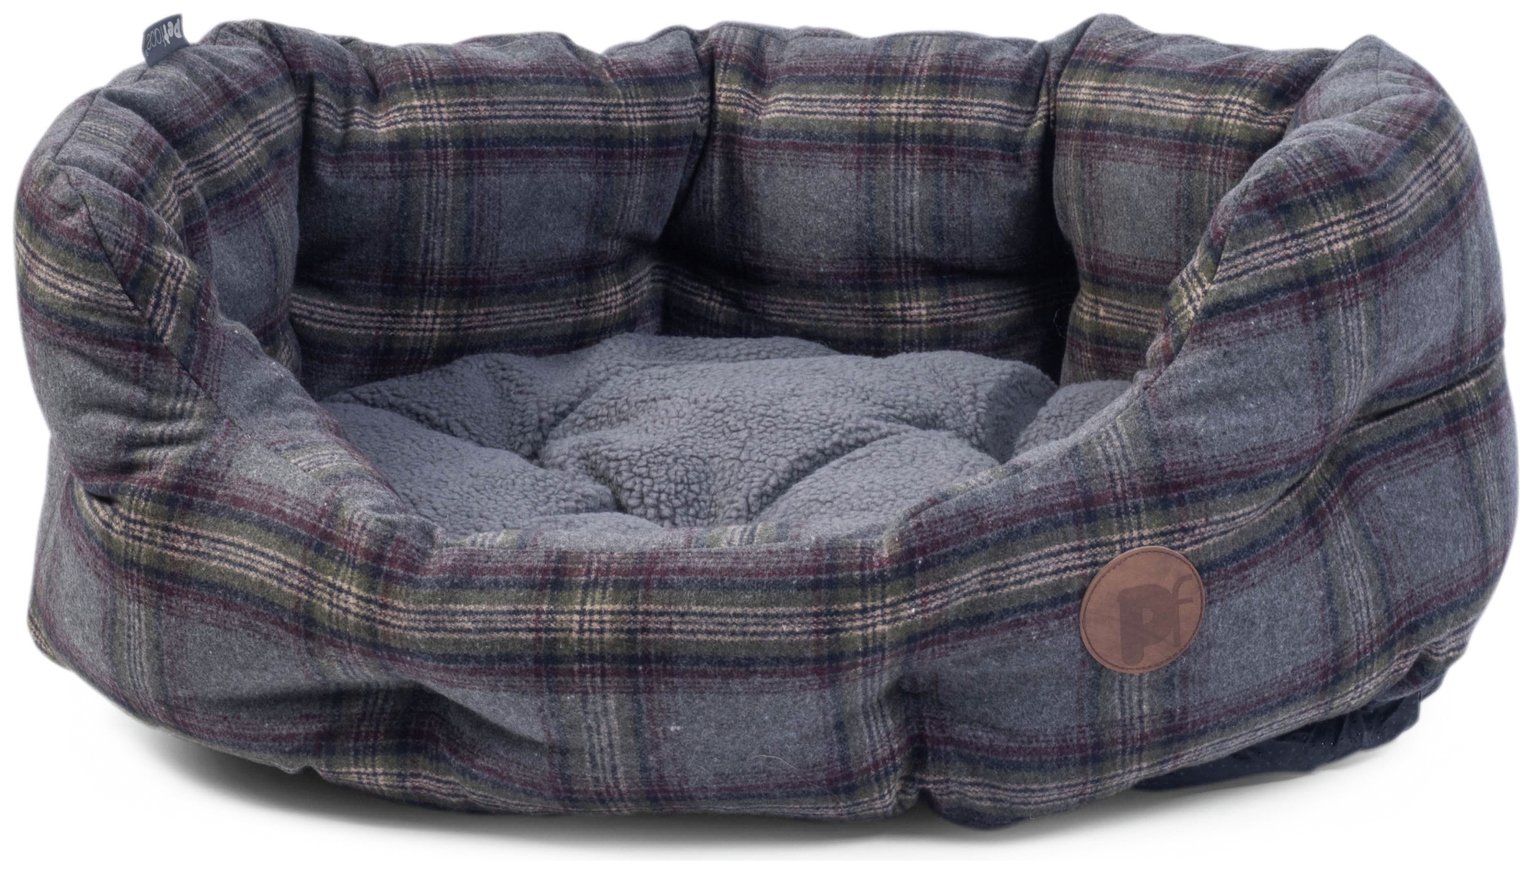 Petface Grey Tweed Oval Pet Bed - Large